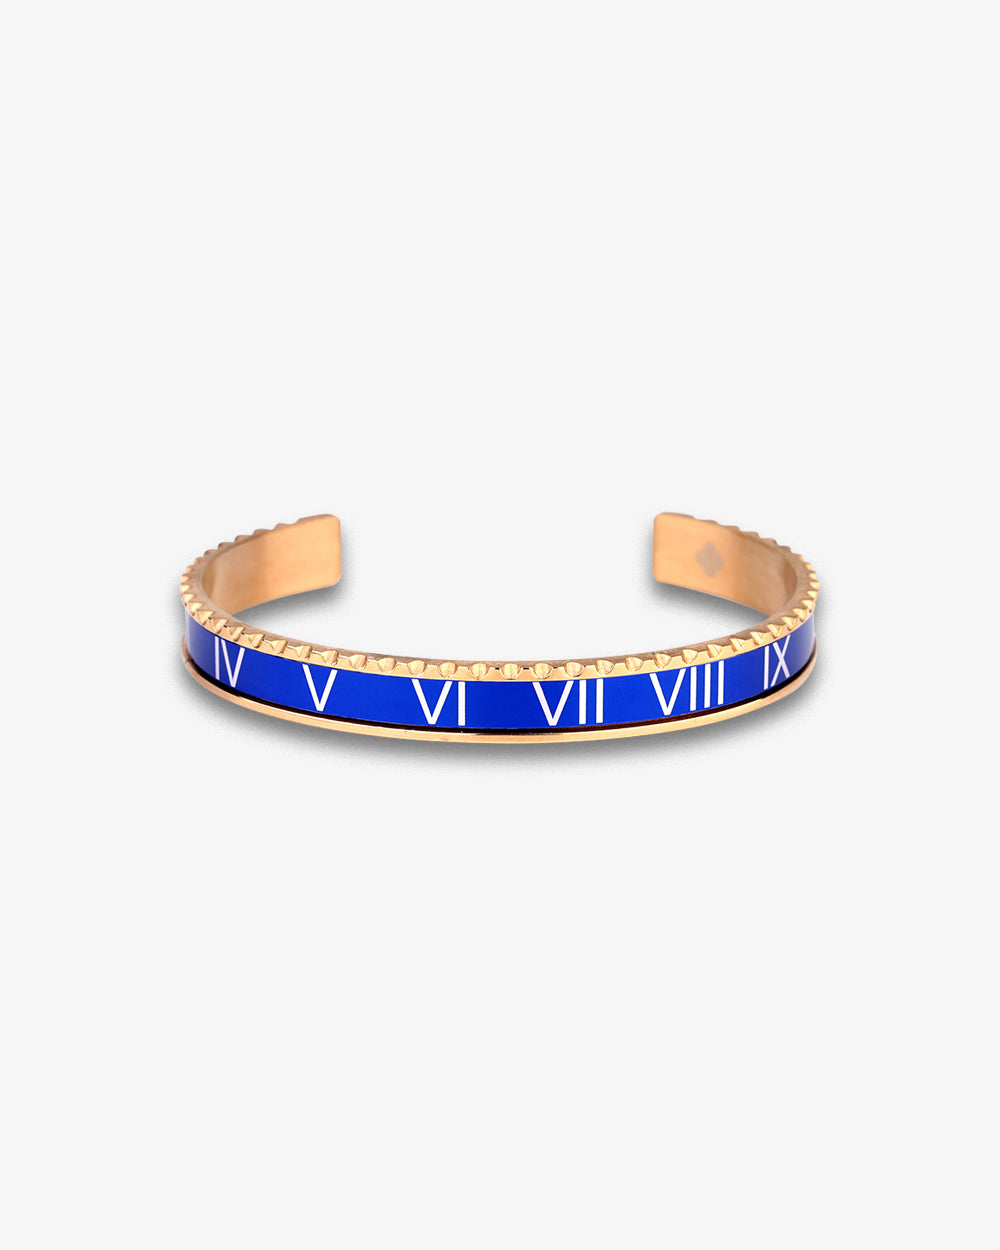 Swiss Concept Classic Roman Numeral Speed Bracelet (Blue & Rose Gold) - Stainless Steel